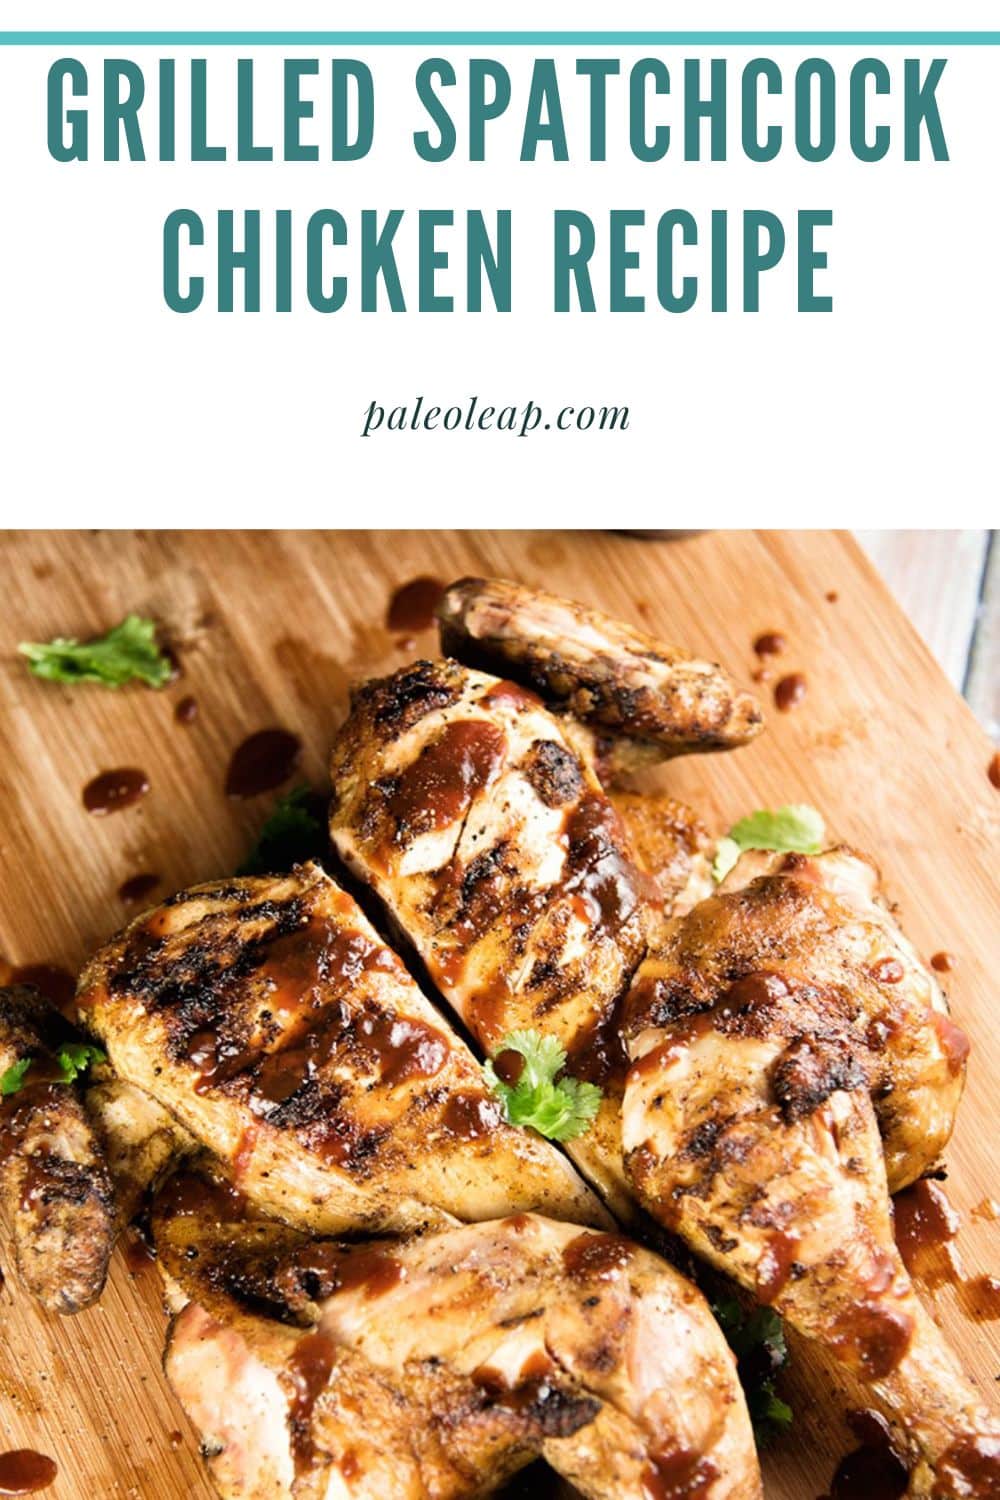 Grilled Spatchcock Chicken Recipe | Paleo Leap